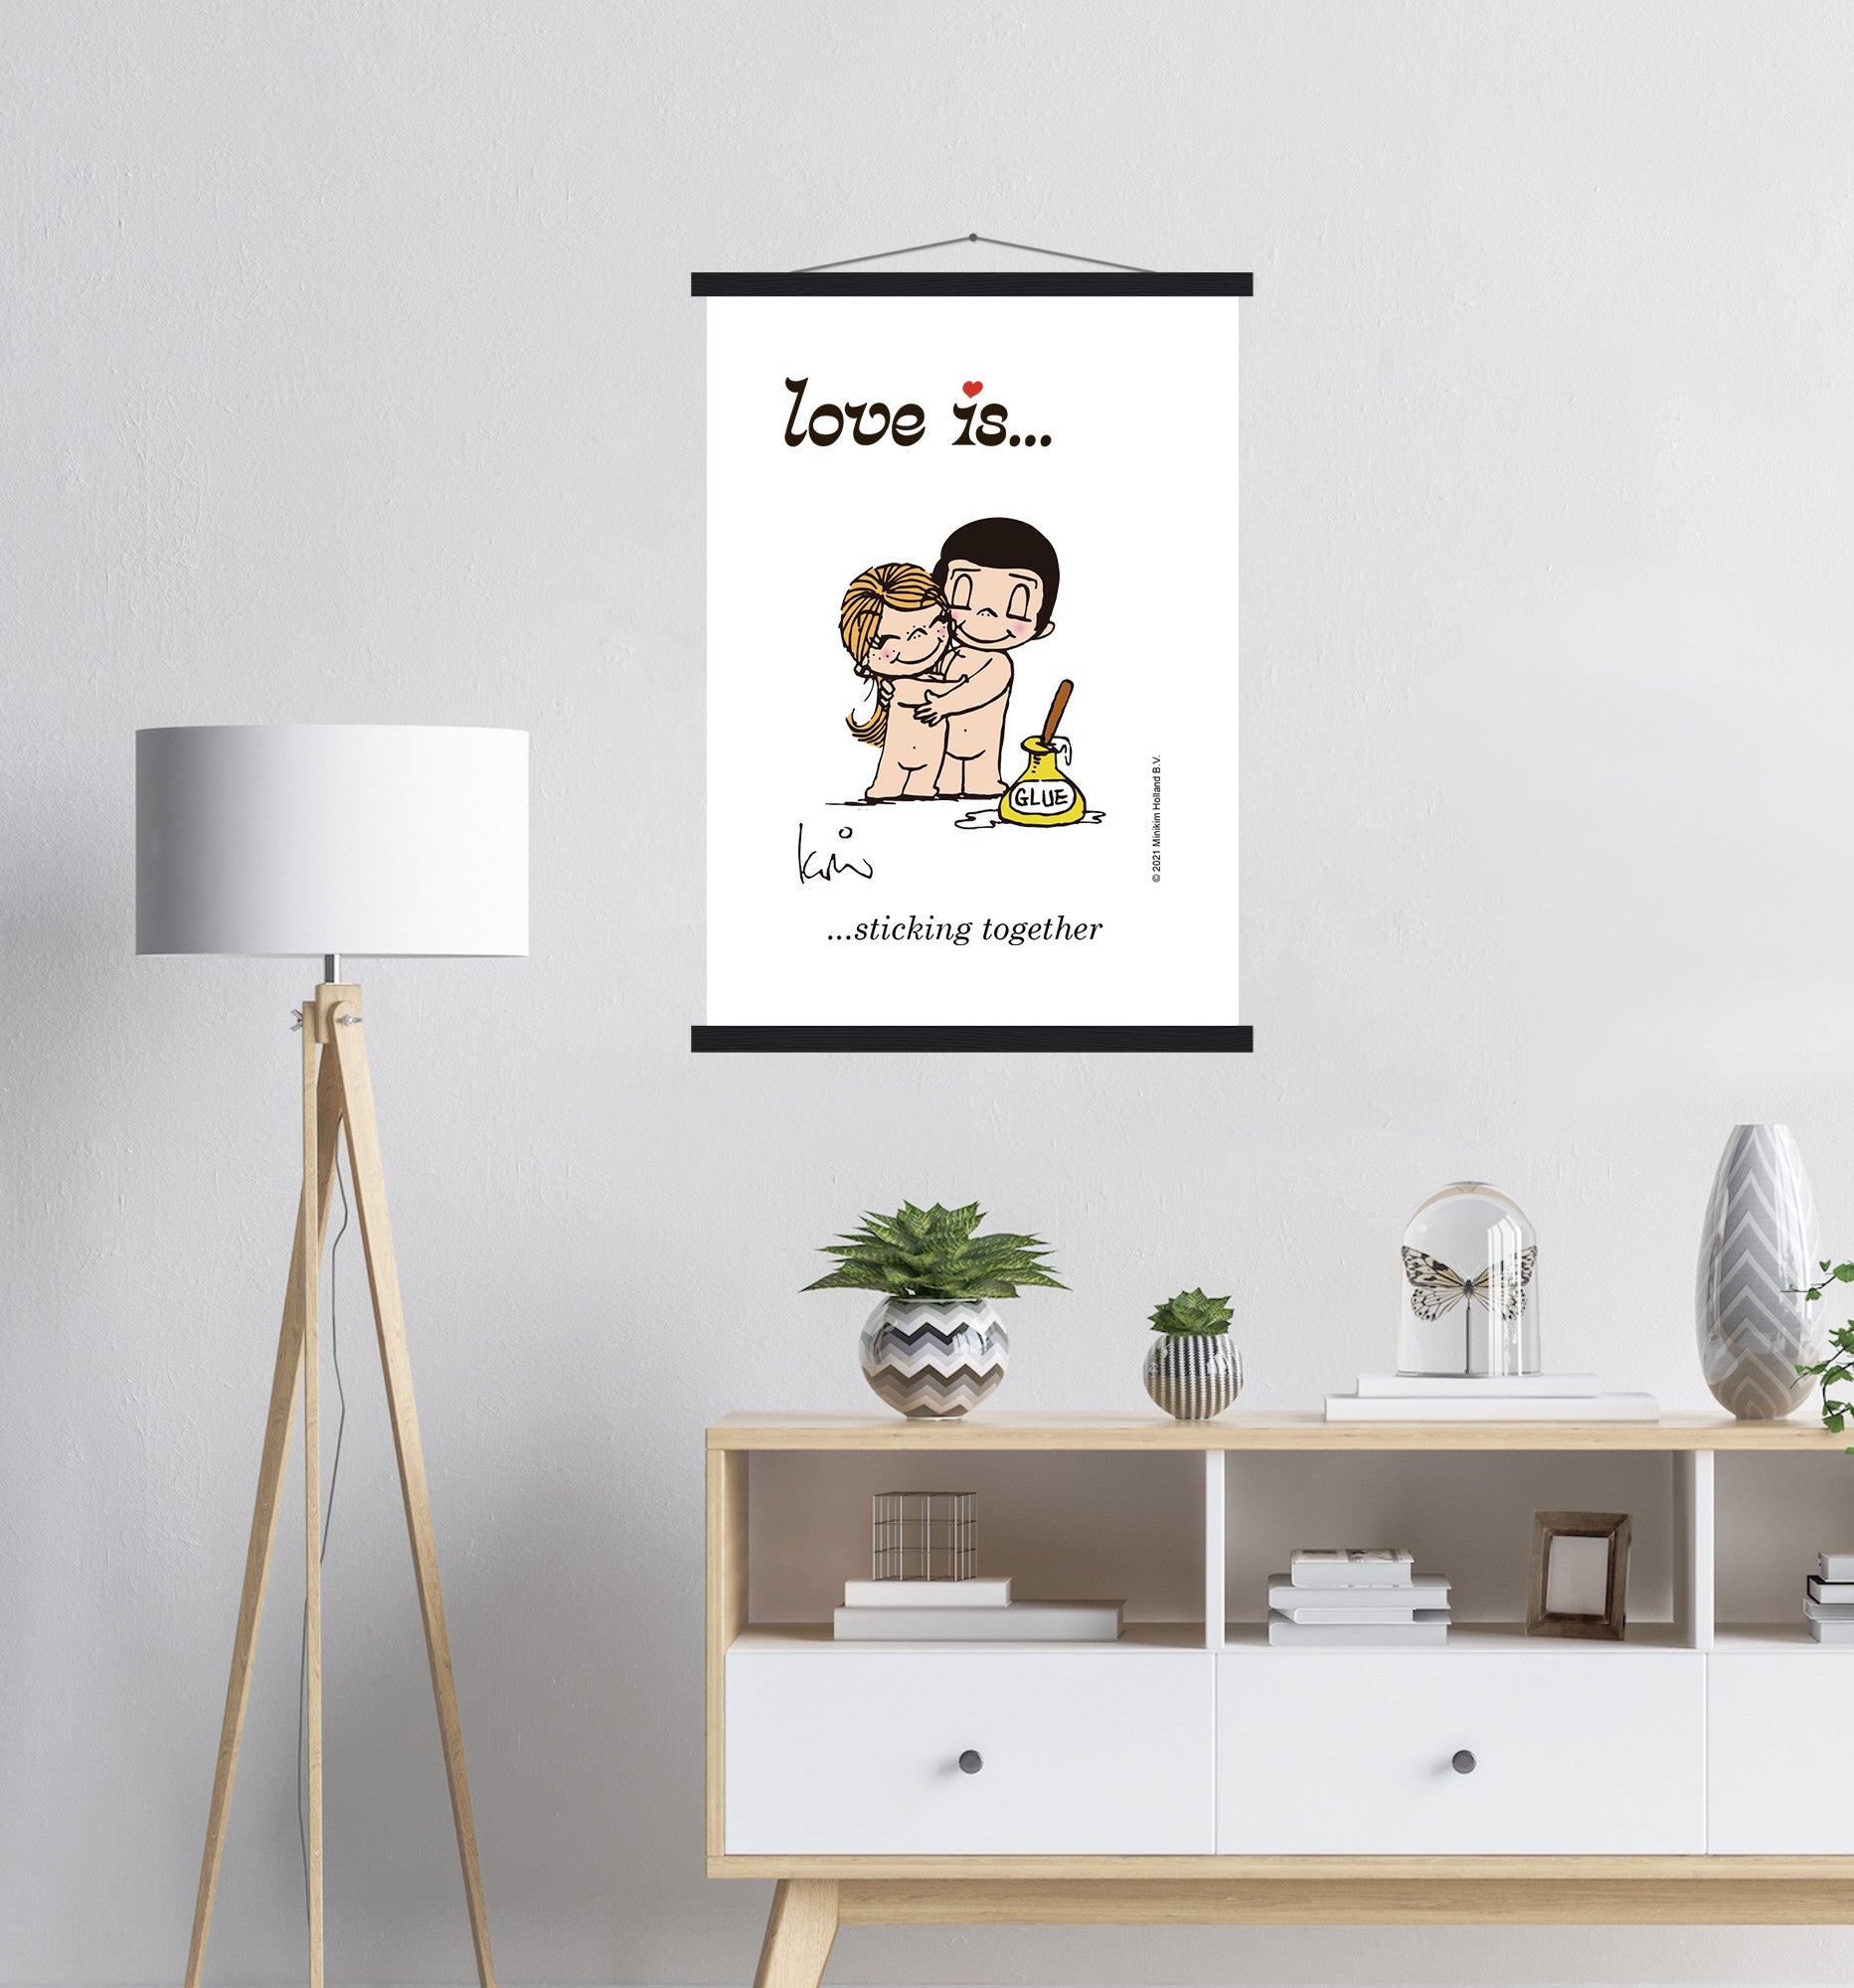 Couple in love gift cute stick figures Framed Mini Art Print by benabten